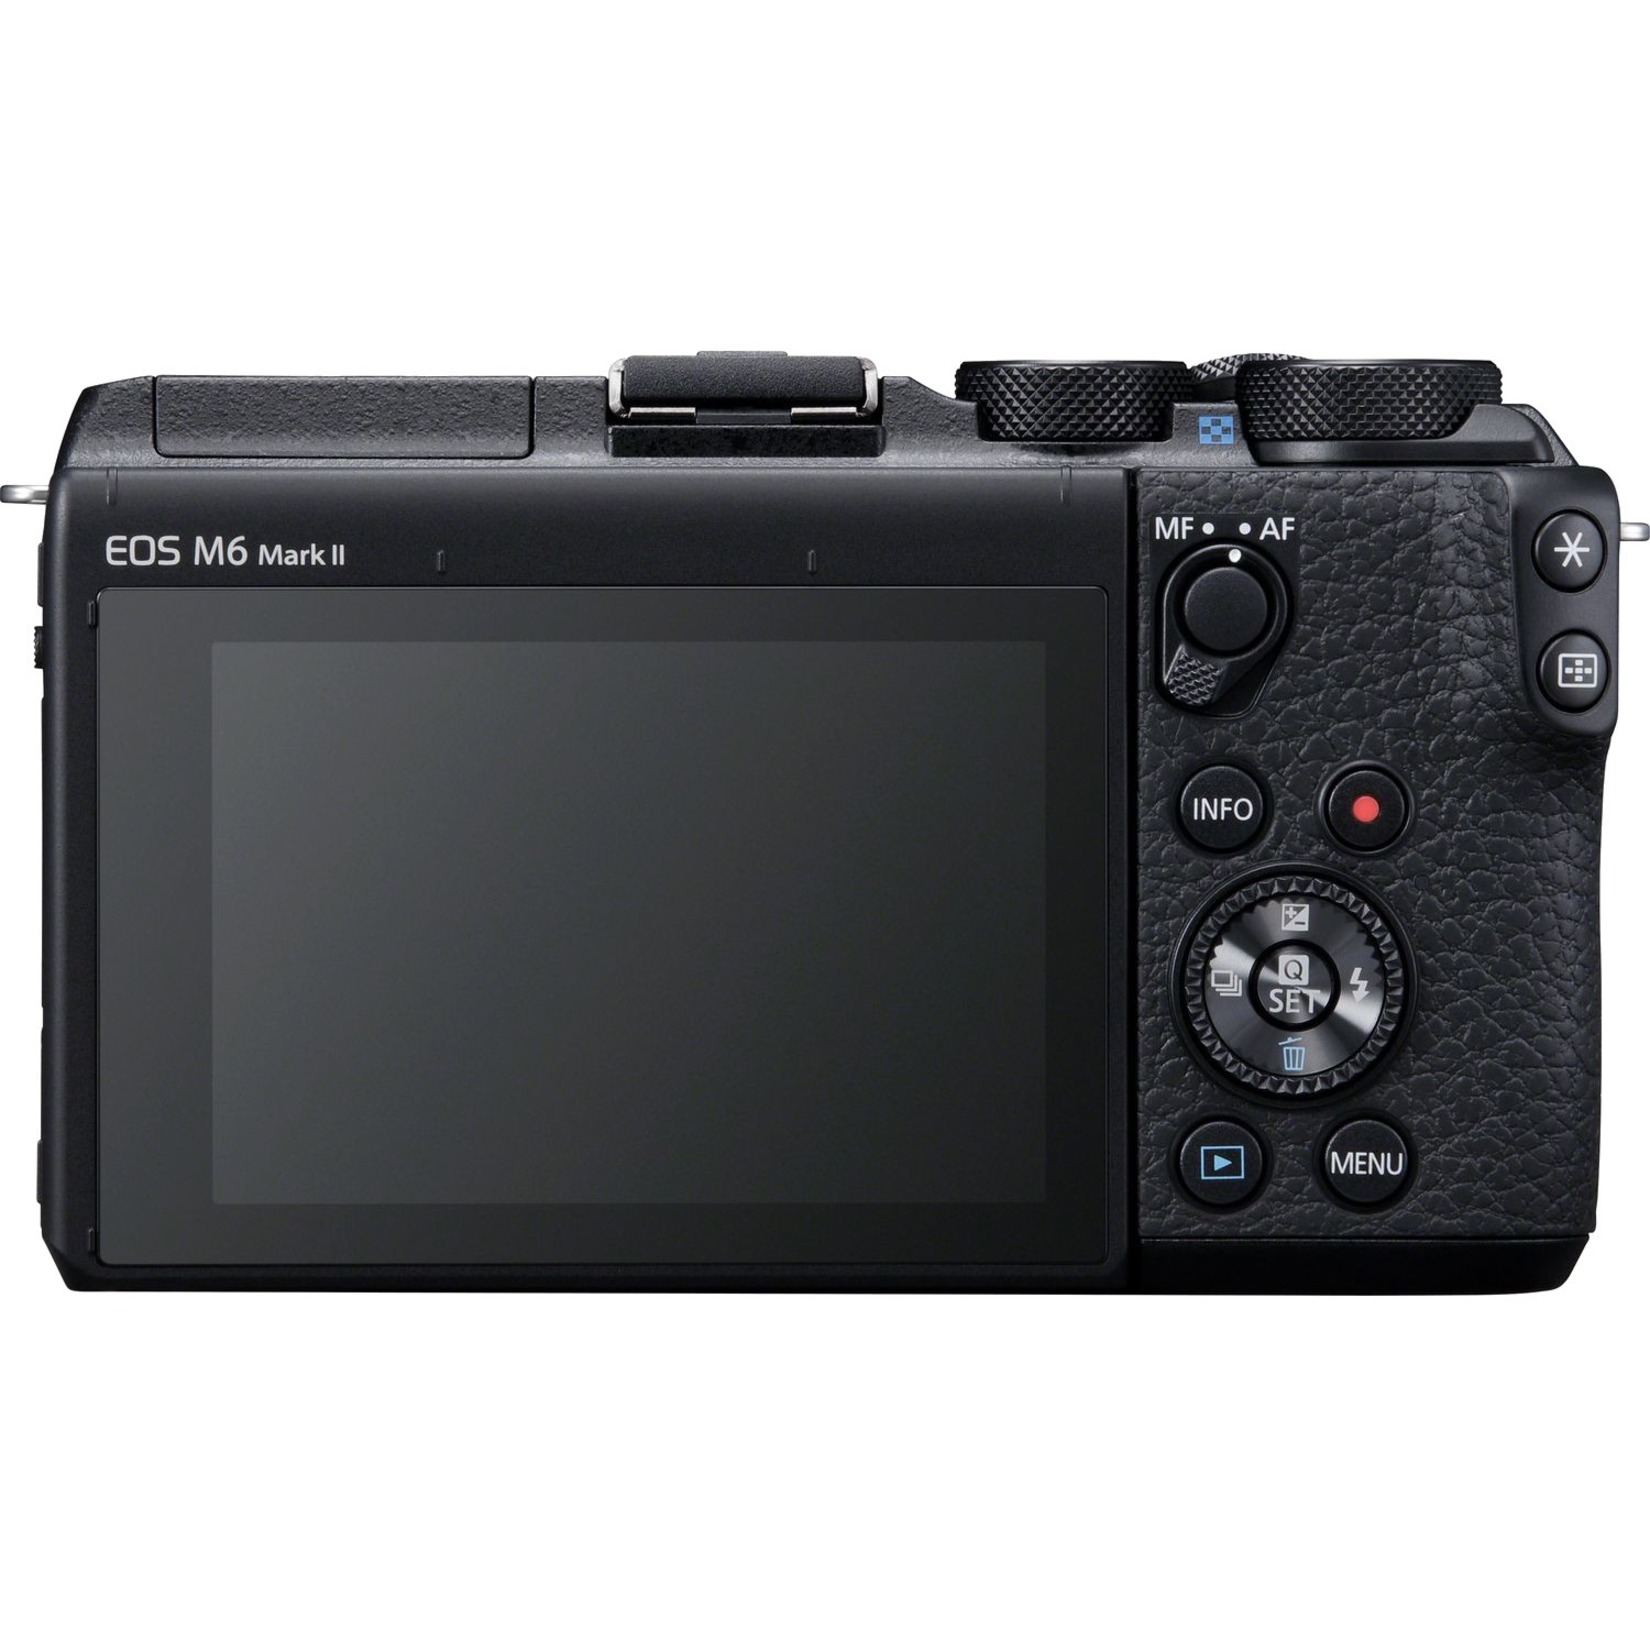 Canon EOS M6 Mark II 32.5 Megapixel Mirrorless Camera Body Only, Black - image 2 of 3